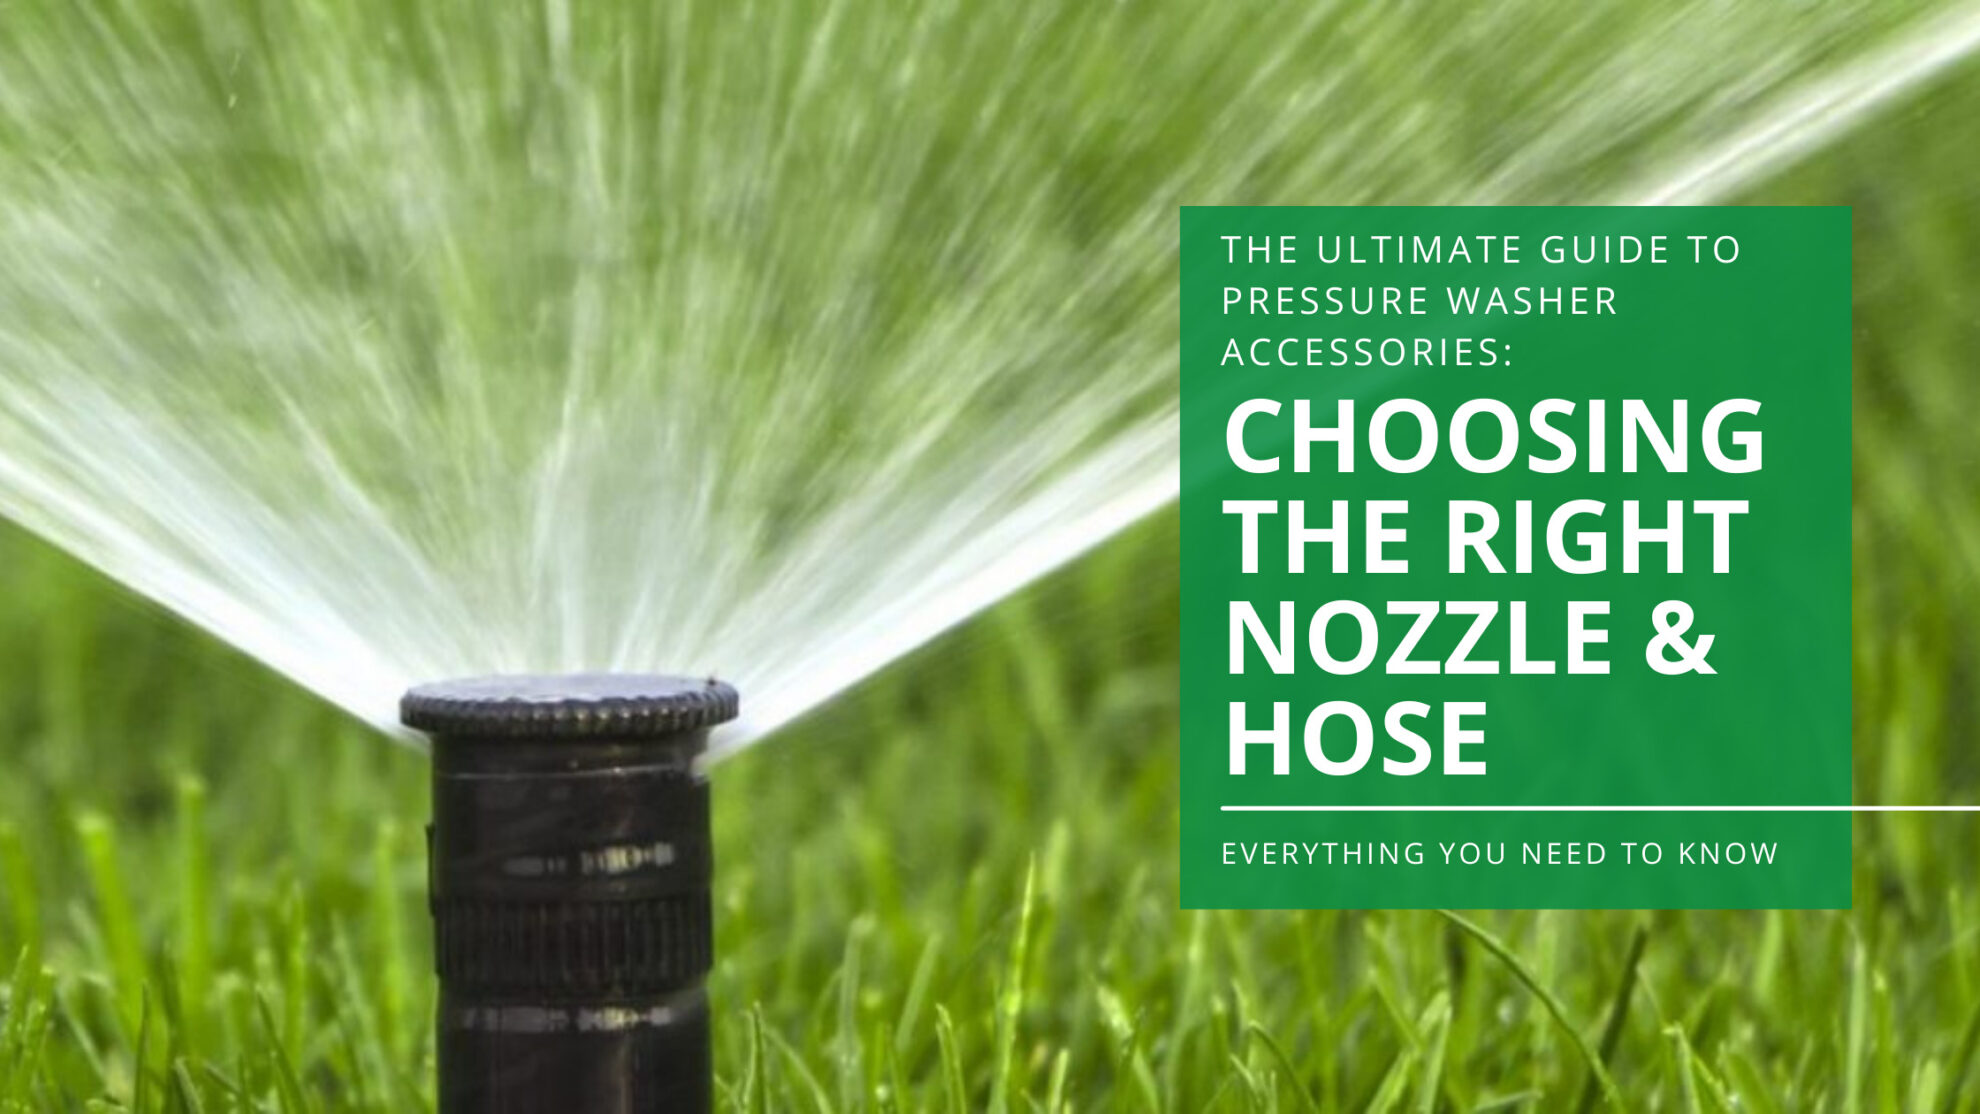 Fire Hose Spray Nozzles: How They Work and How To Choose One